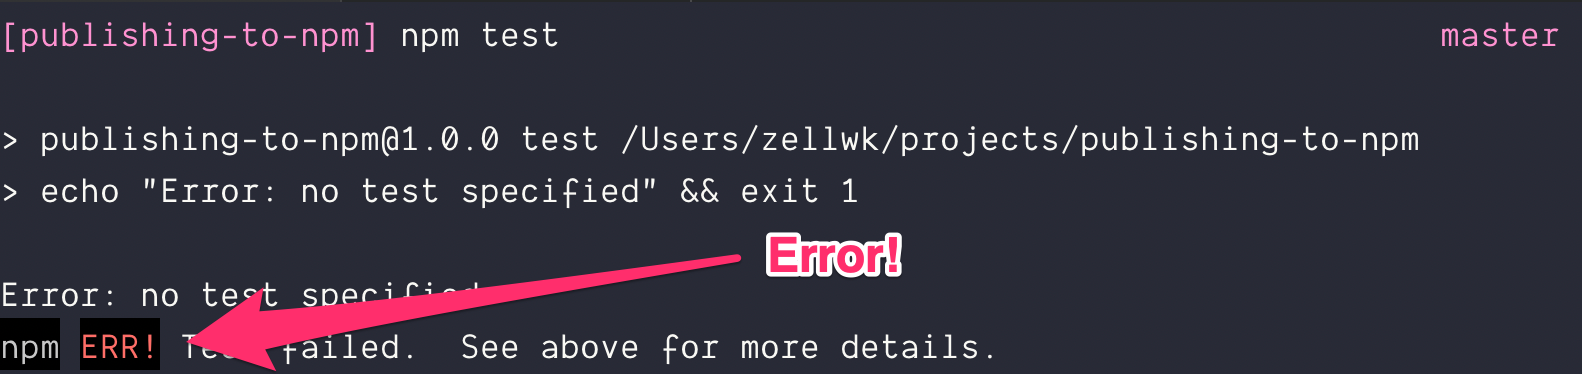 npm test results in an error